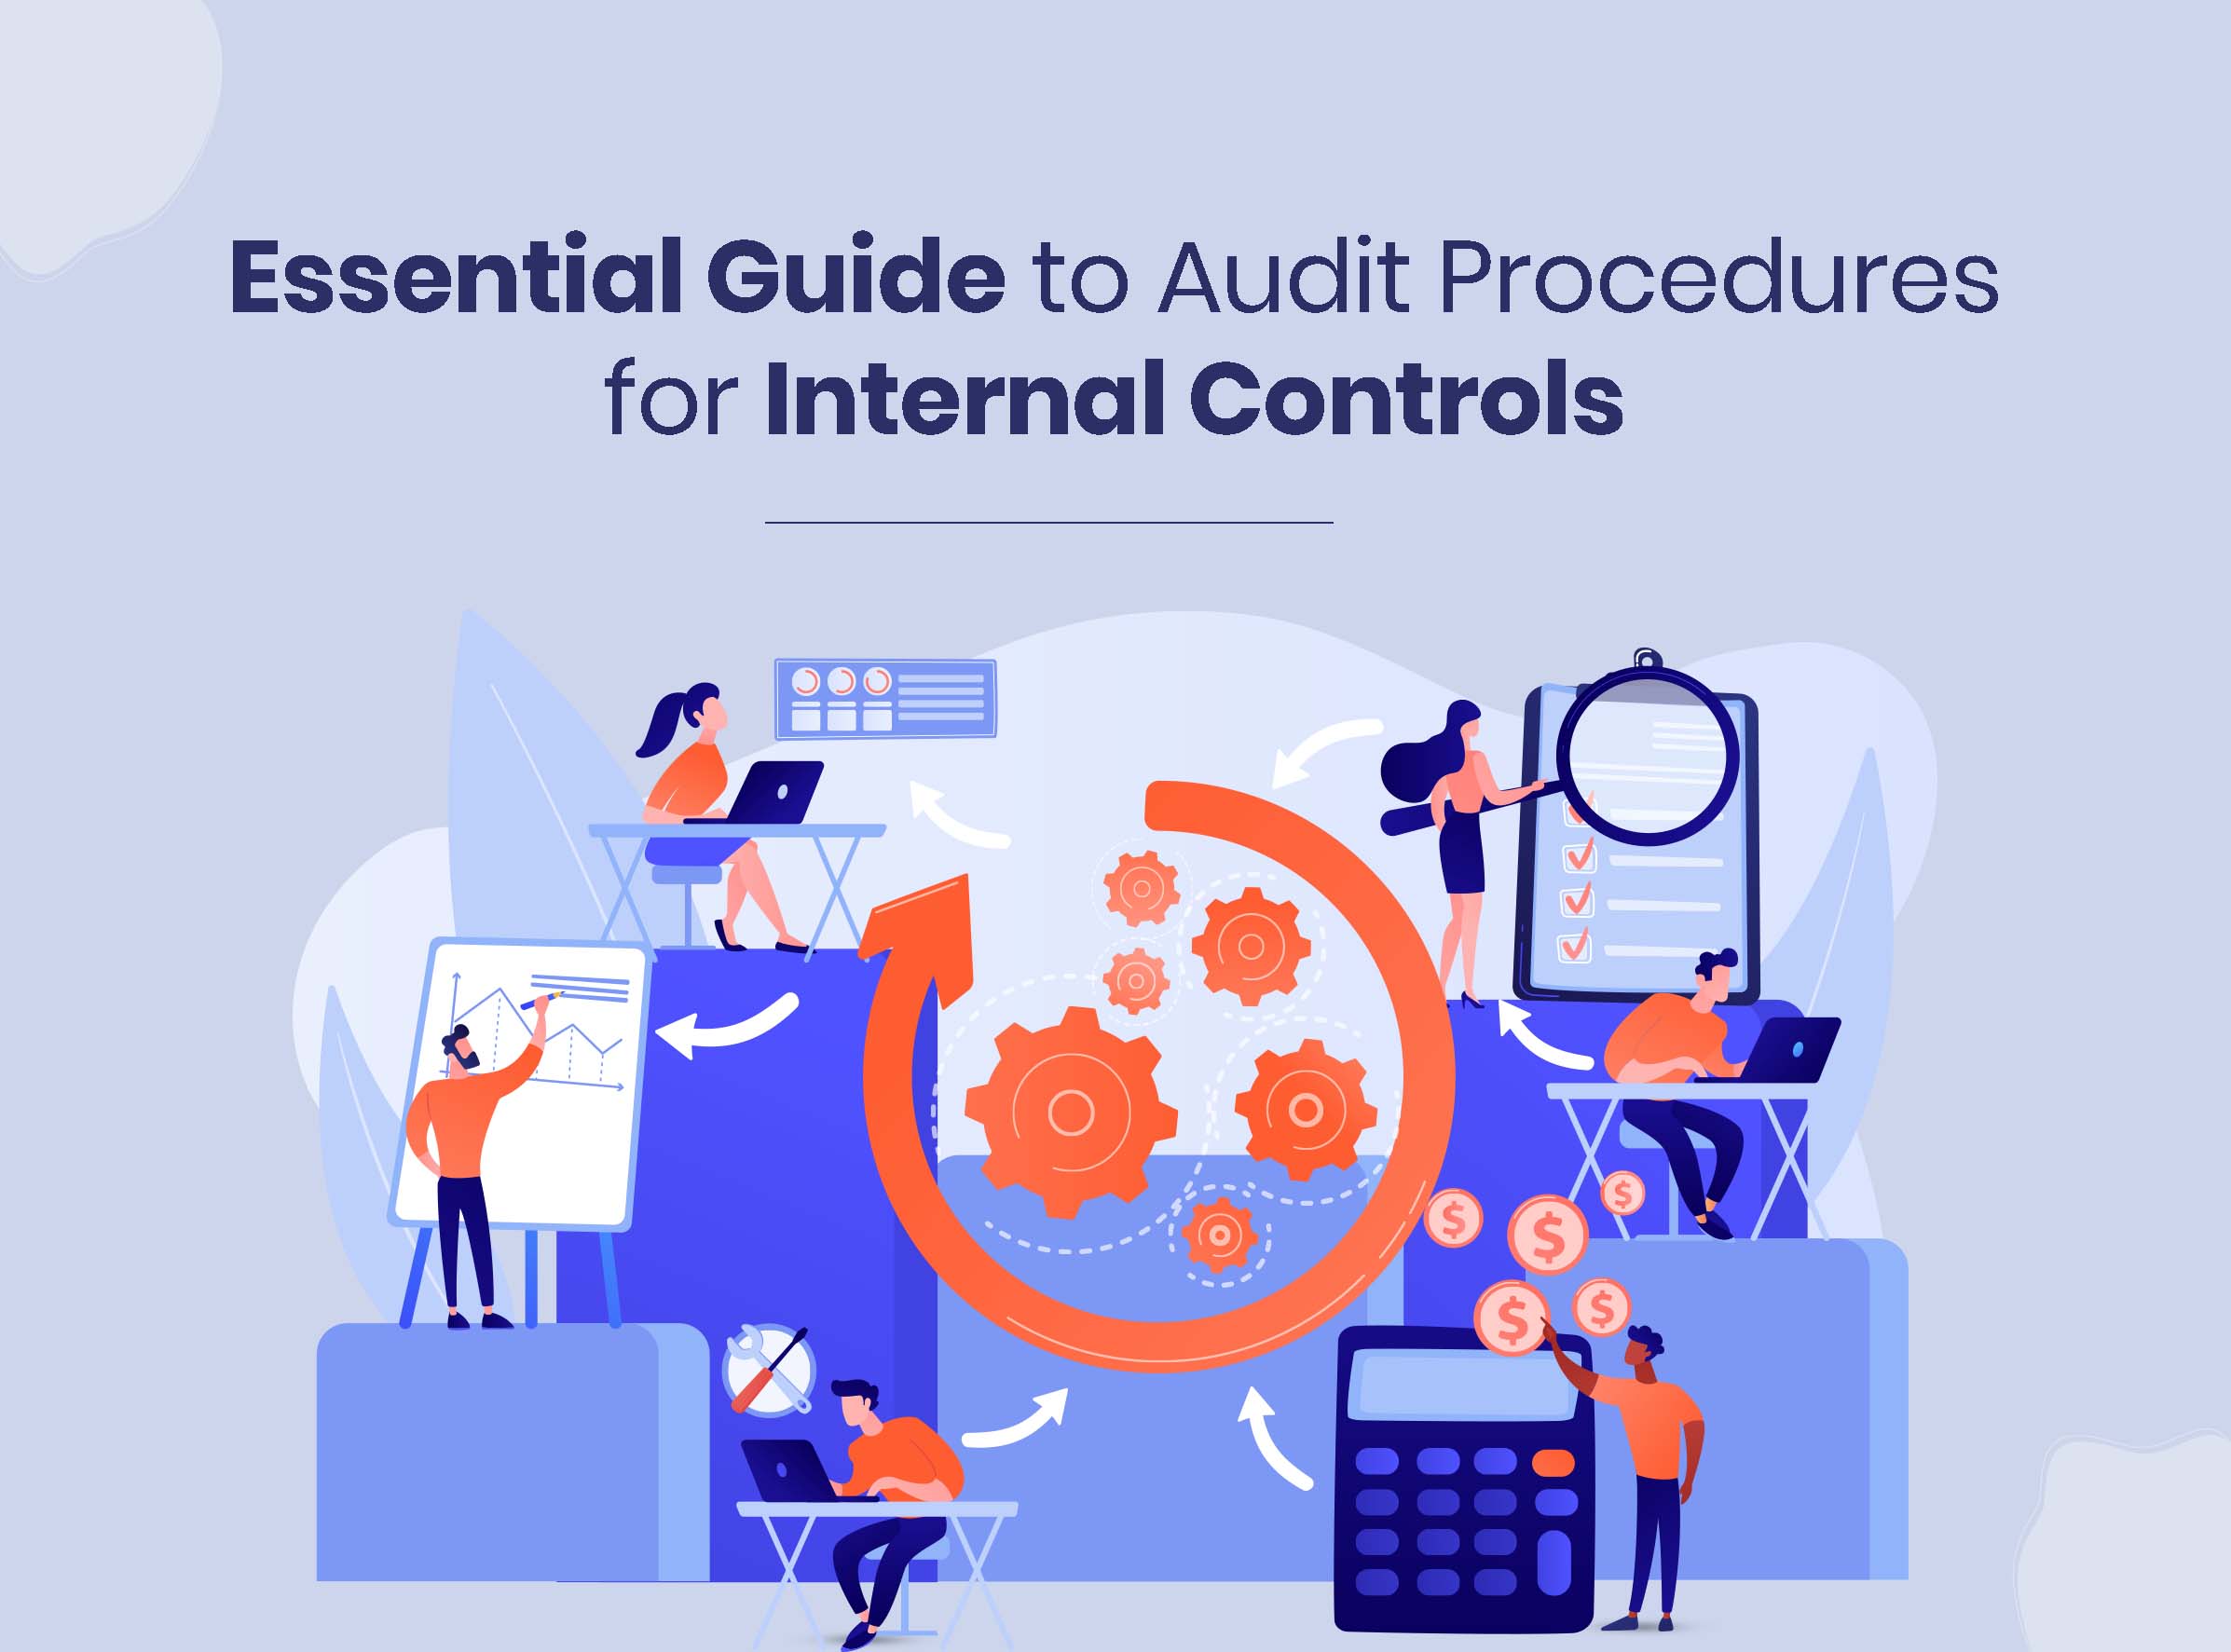 Essential Guide to Audit Procedures for Internal Controls